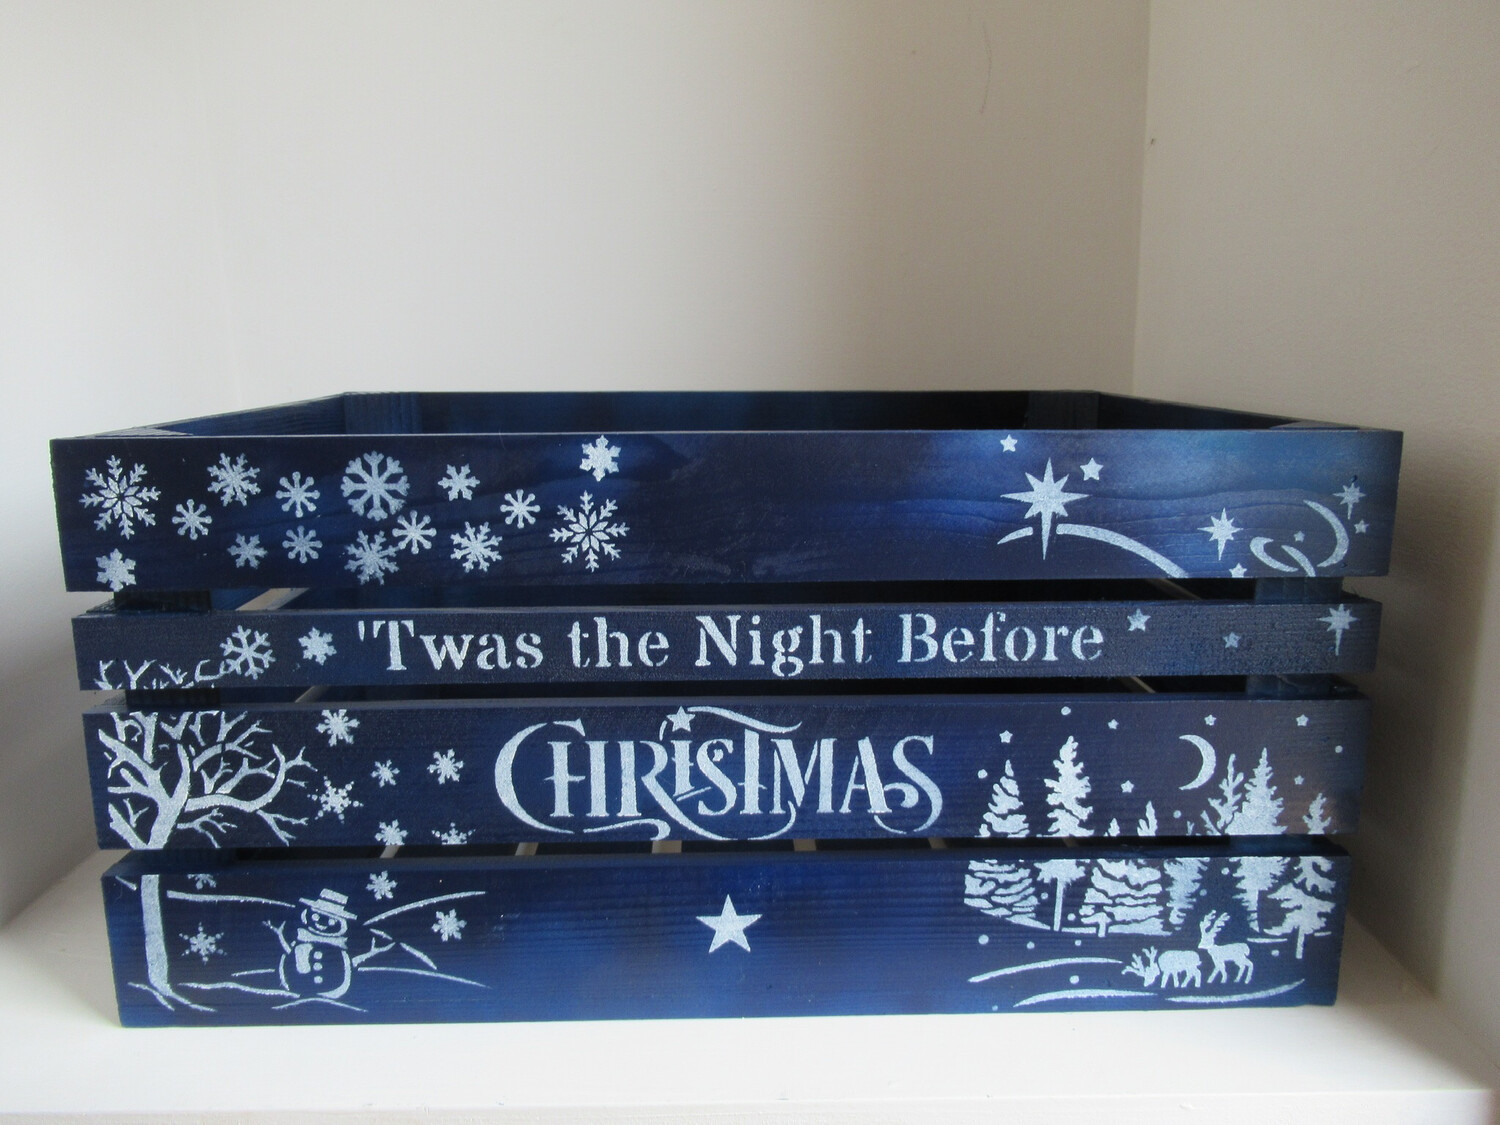 Twas the Night Before Christmas Personalised Christmas Crate Box